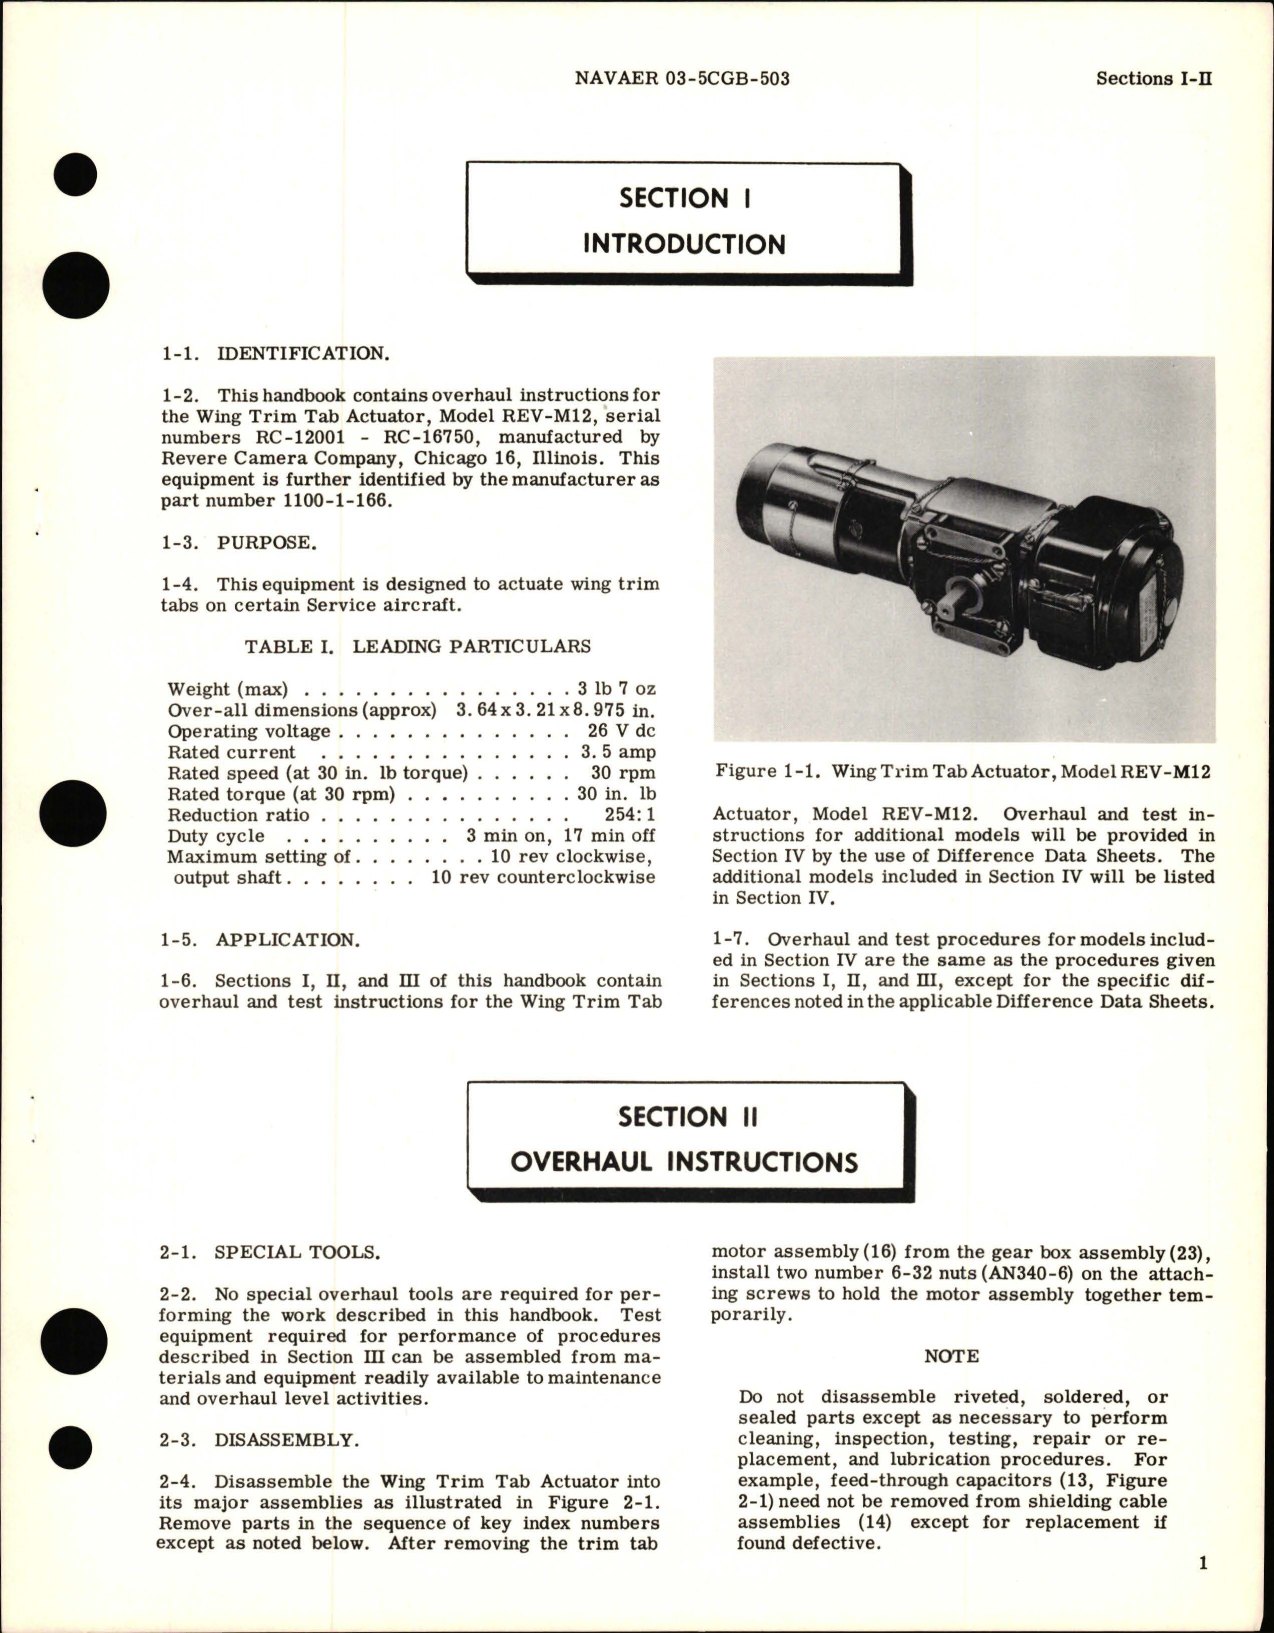 Sample page 5 from AirCorps Library document: Overhaul Instructions for Wing Trim Tab Actuator Model REV-M12 - Part 1100-1-166 